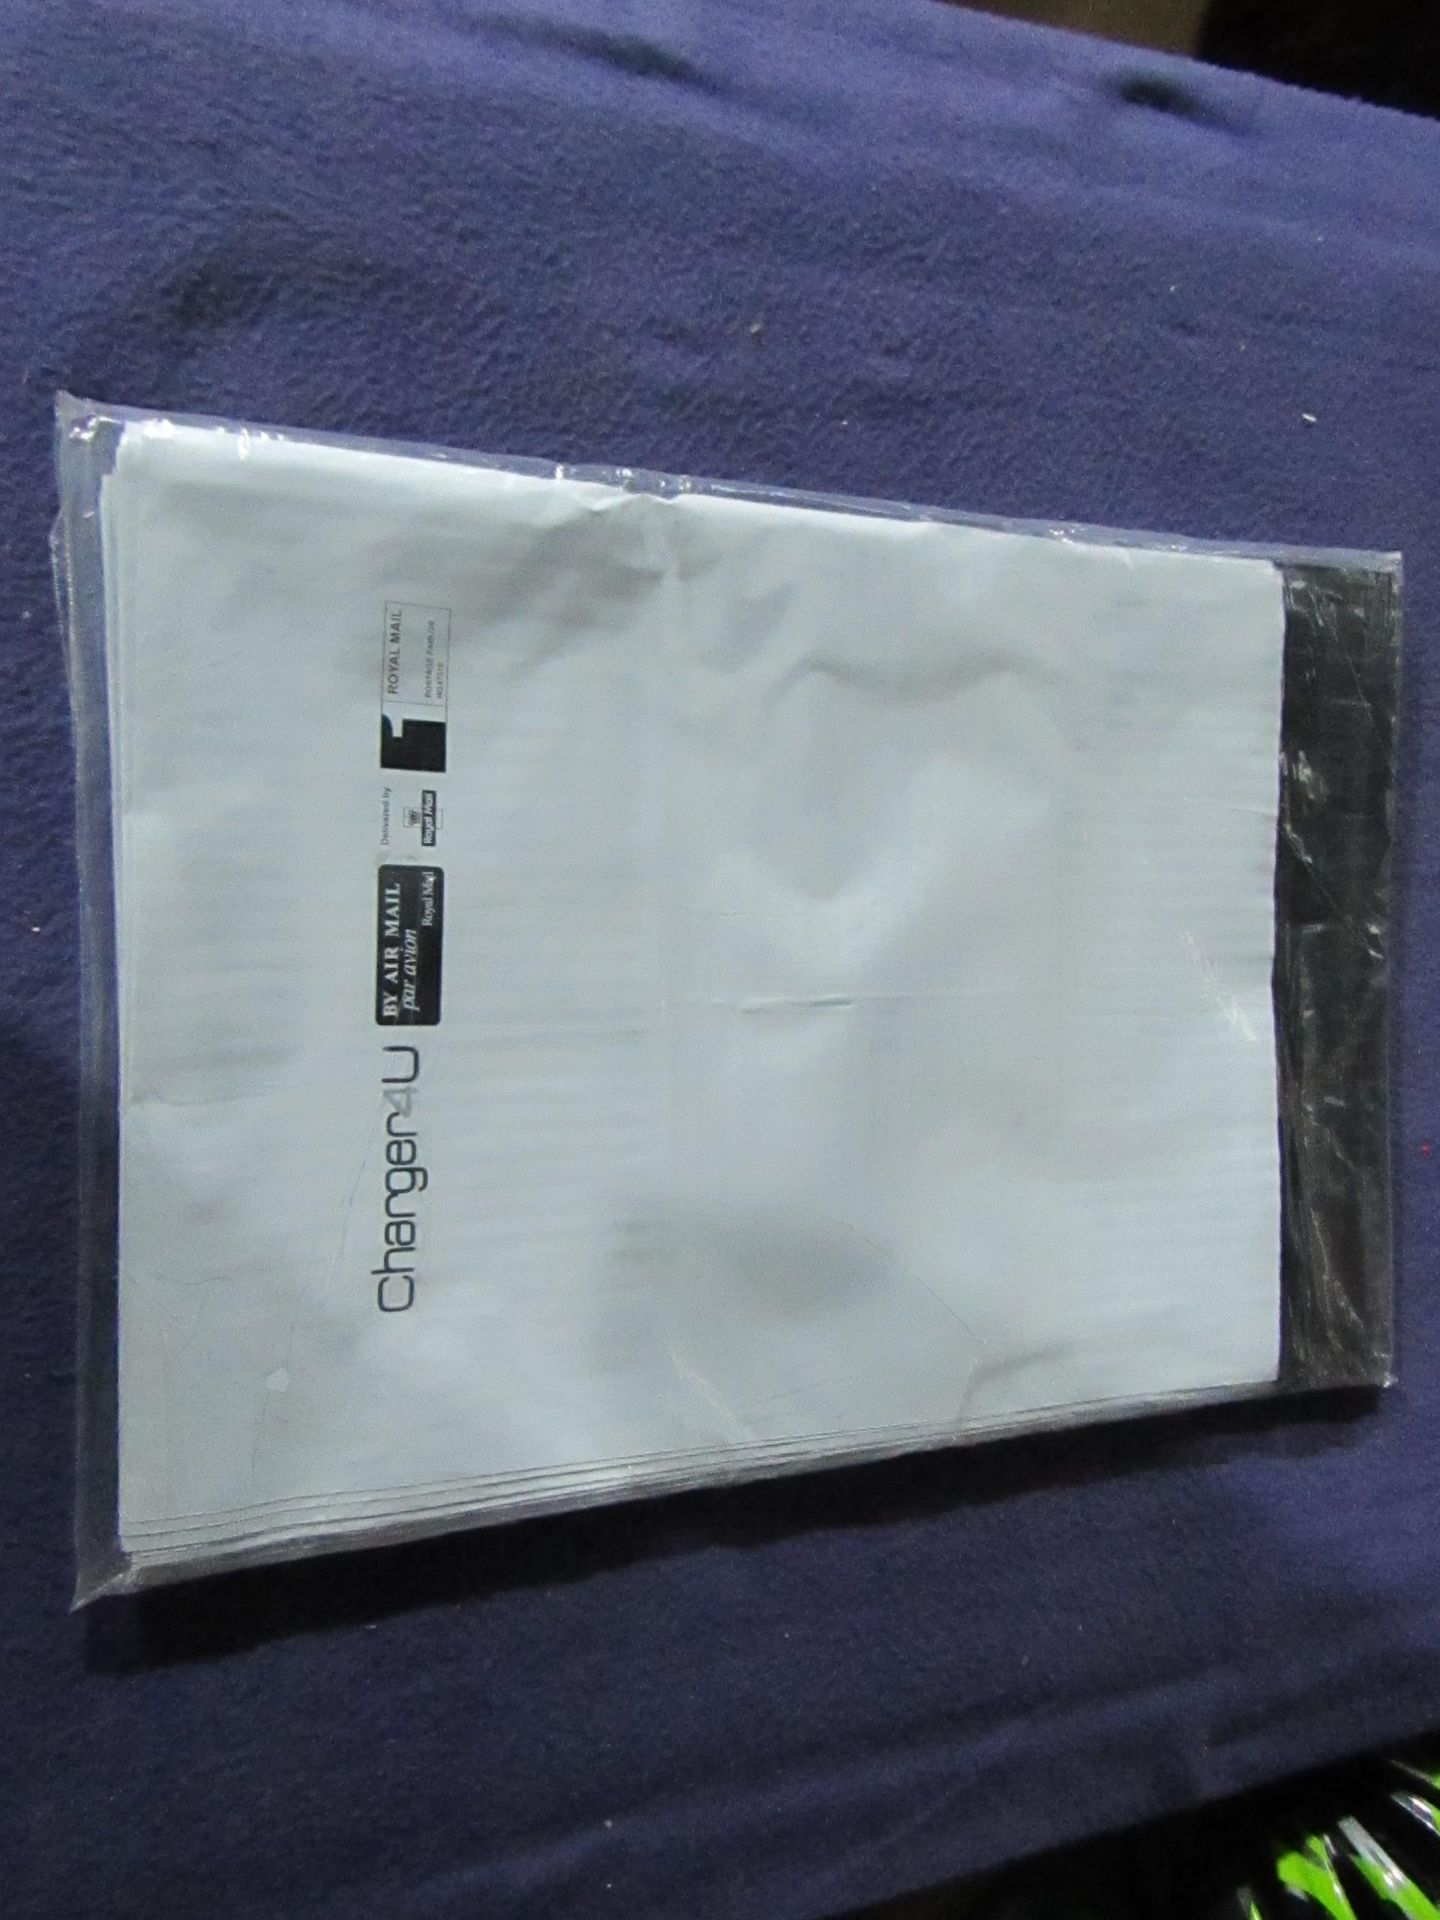 Charger4U - Grey Royal Mail Postage Bags ( 100 Per Pack ) - New & Packaged.